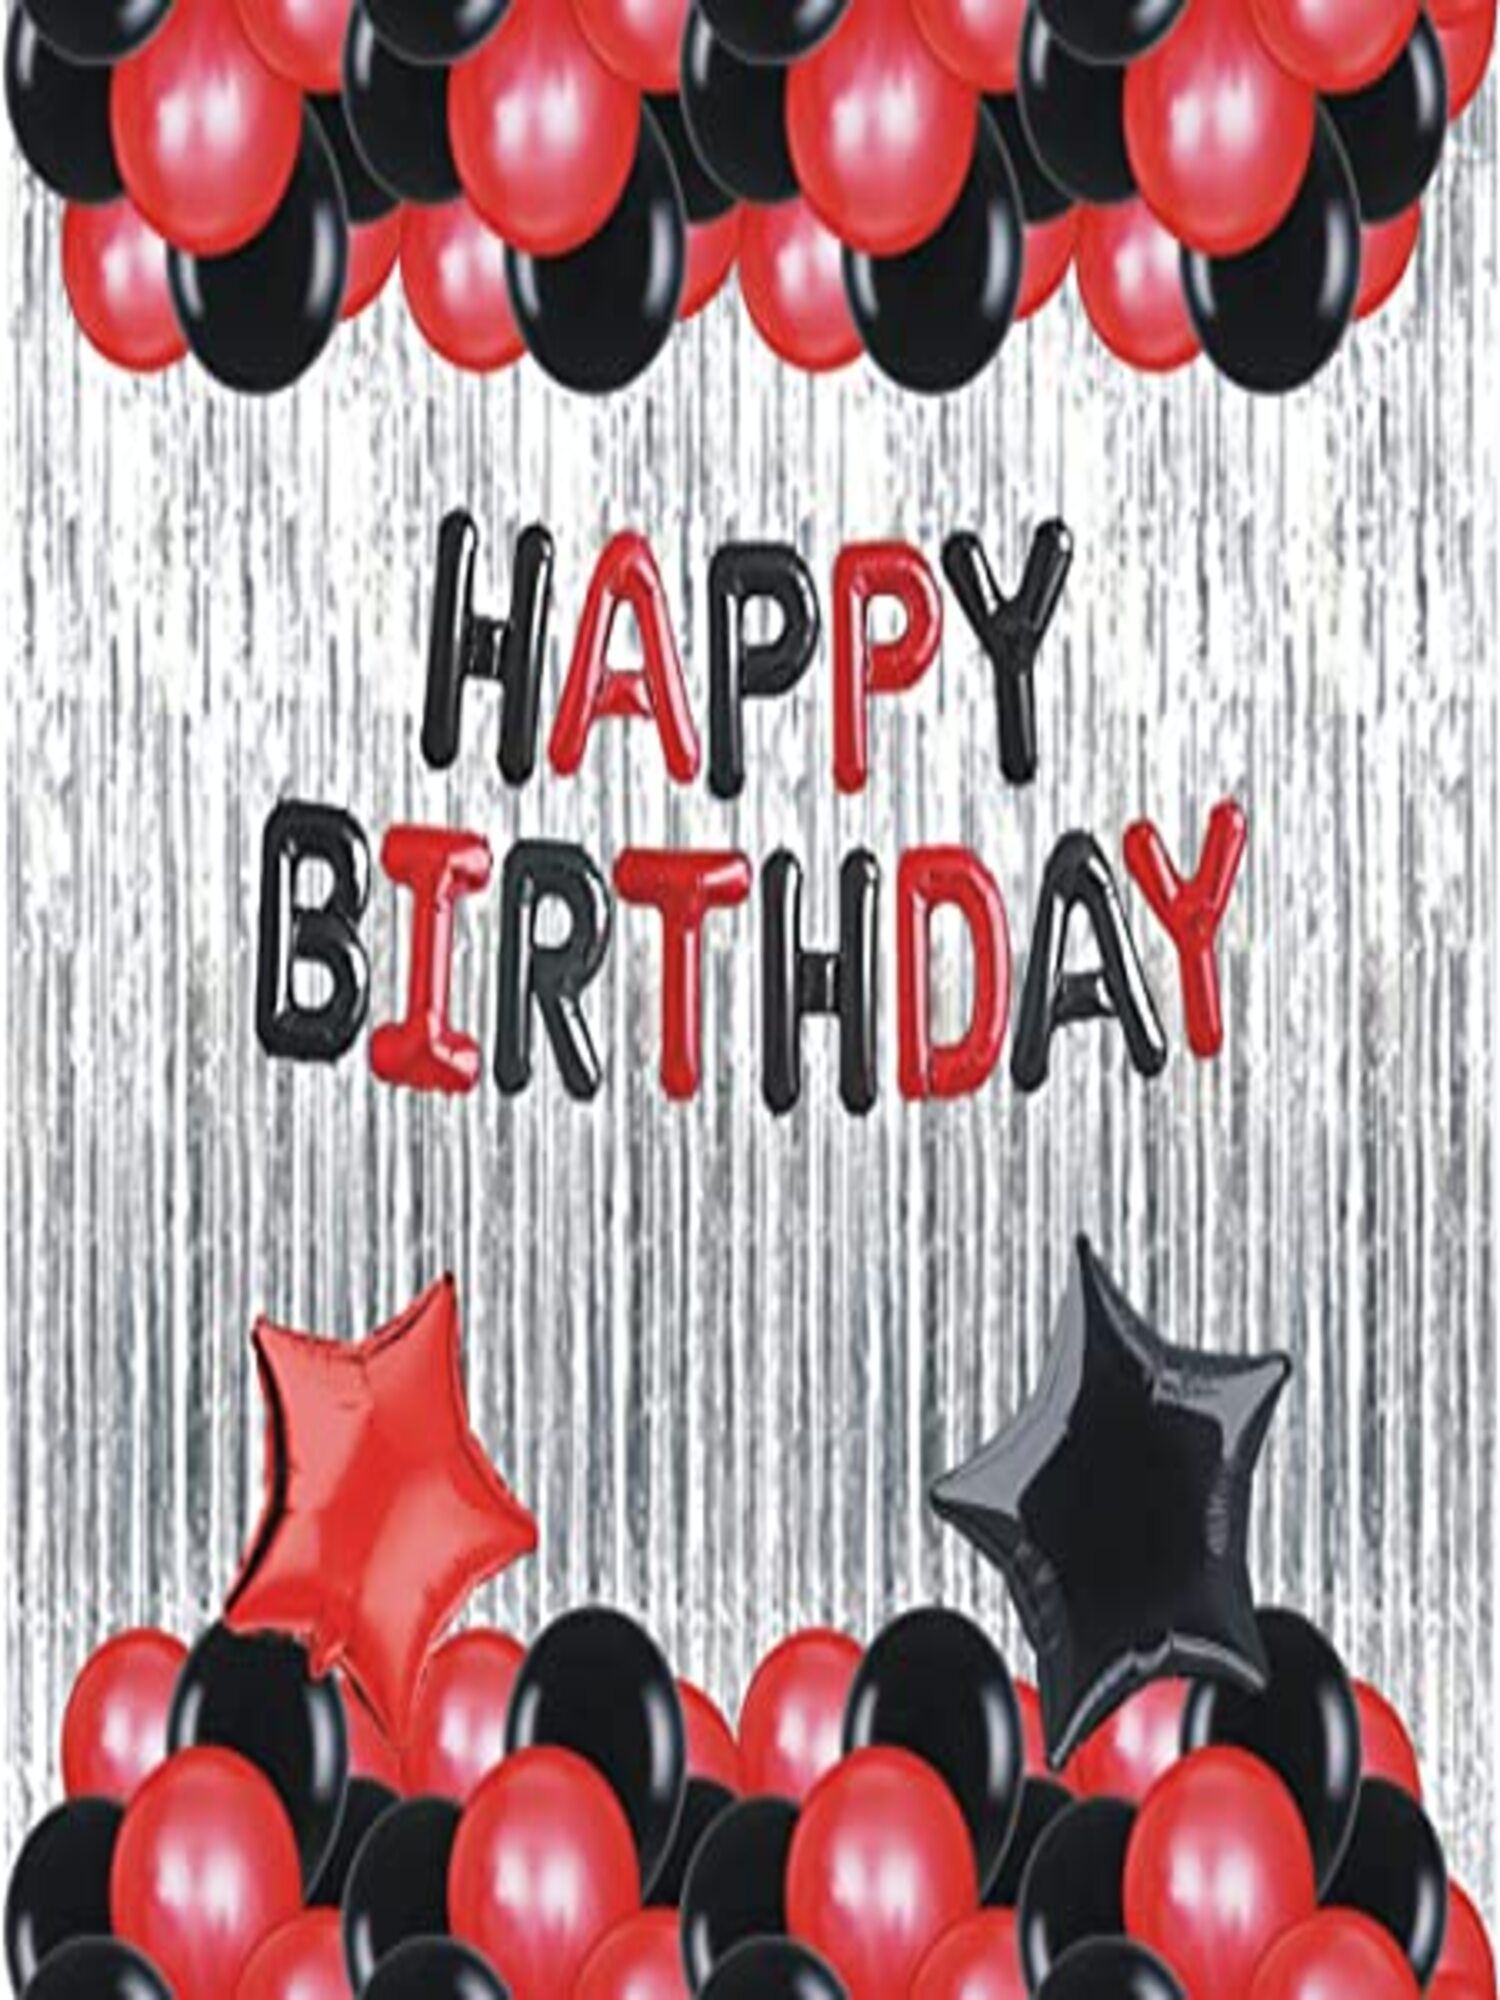     			Devdrishti Products Happy Birthday Red Black Foil Banner Decoration Combo pack of 35 pcs contains 1 Birthday Foil 30 Balloons 2 Curtains 2 Foil Stars